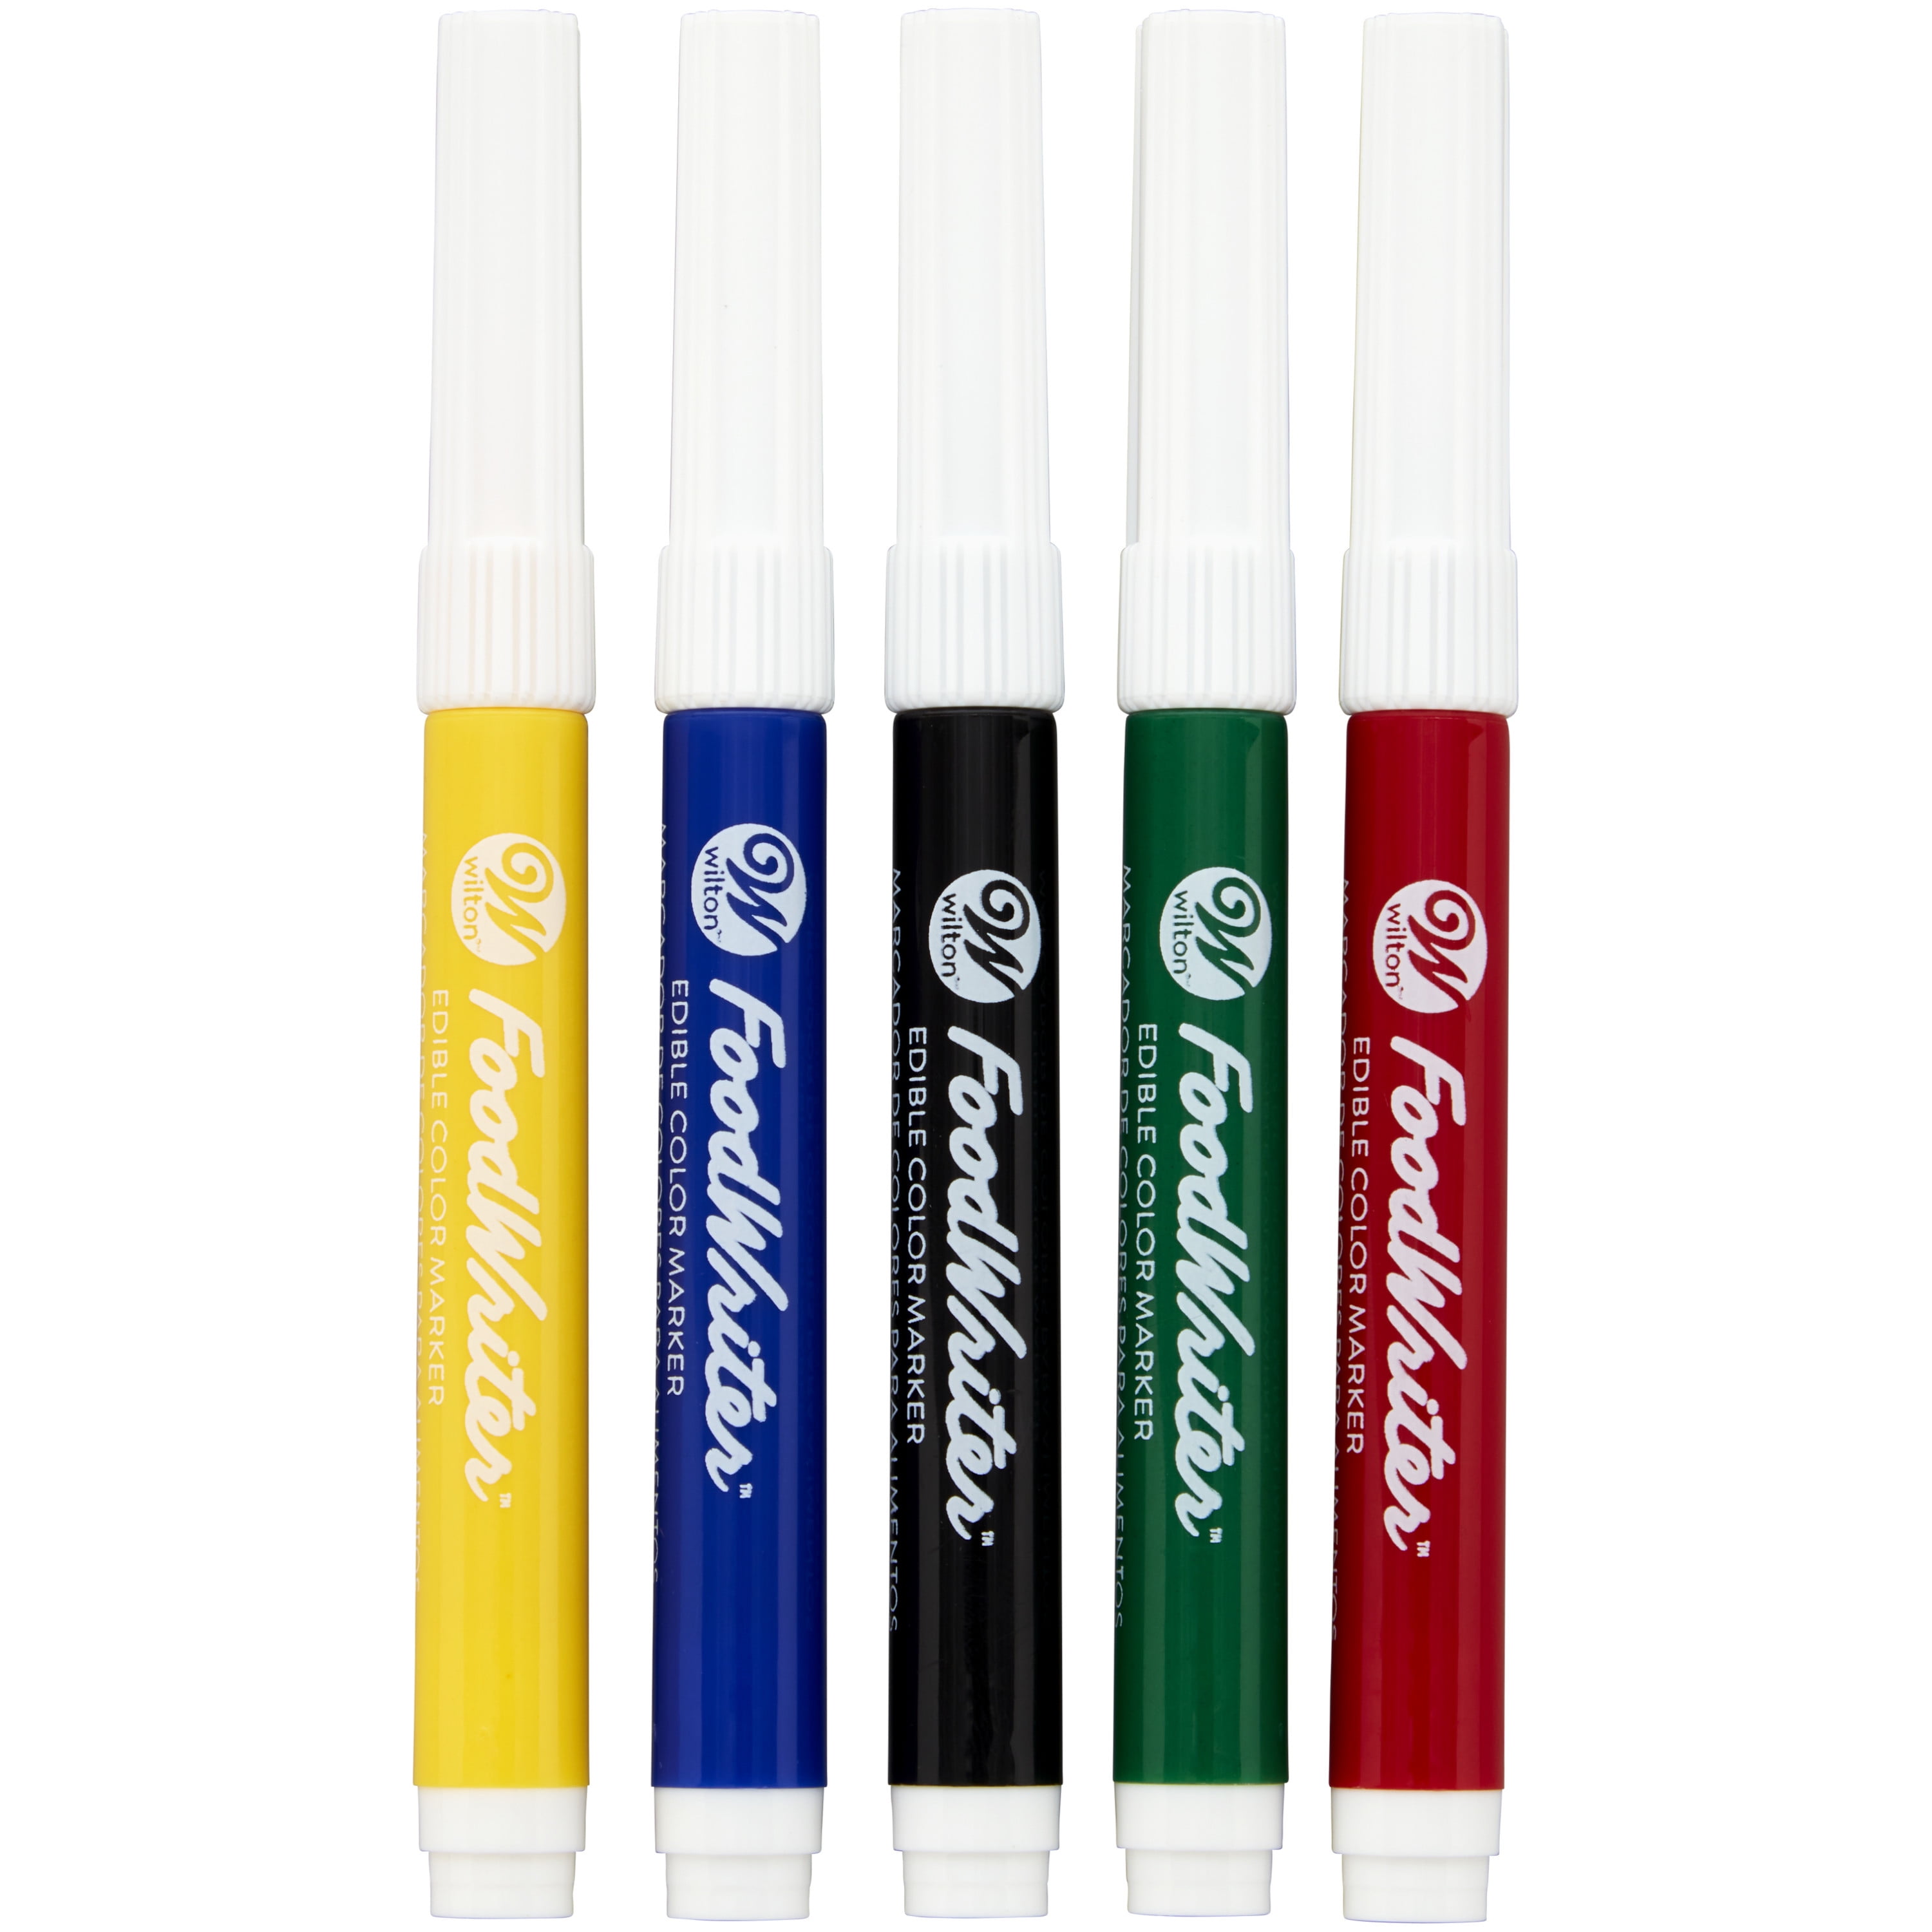 Edible Markers - 8 Colors